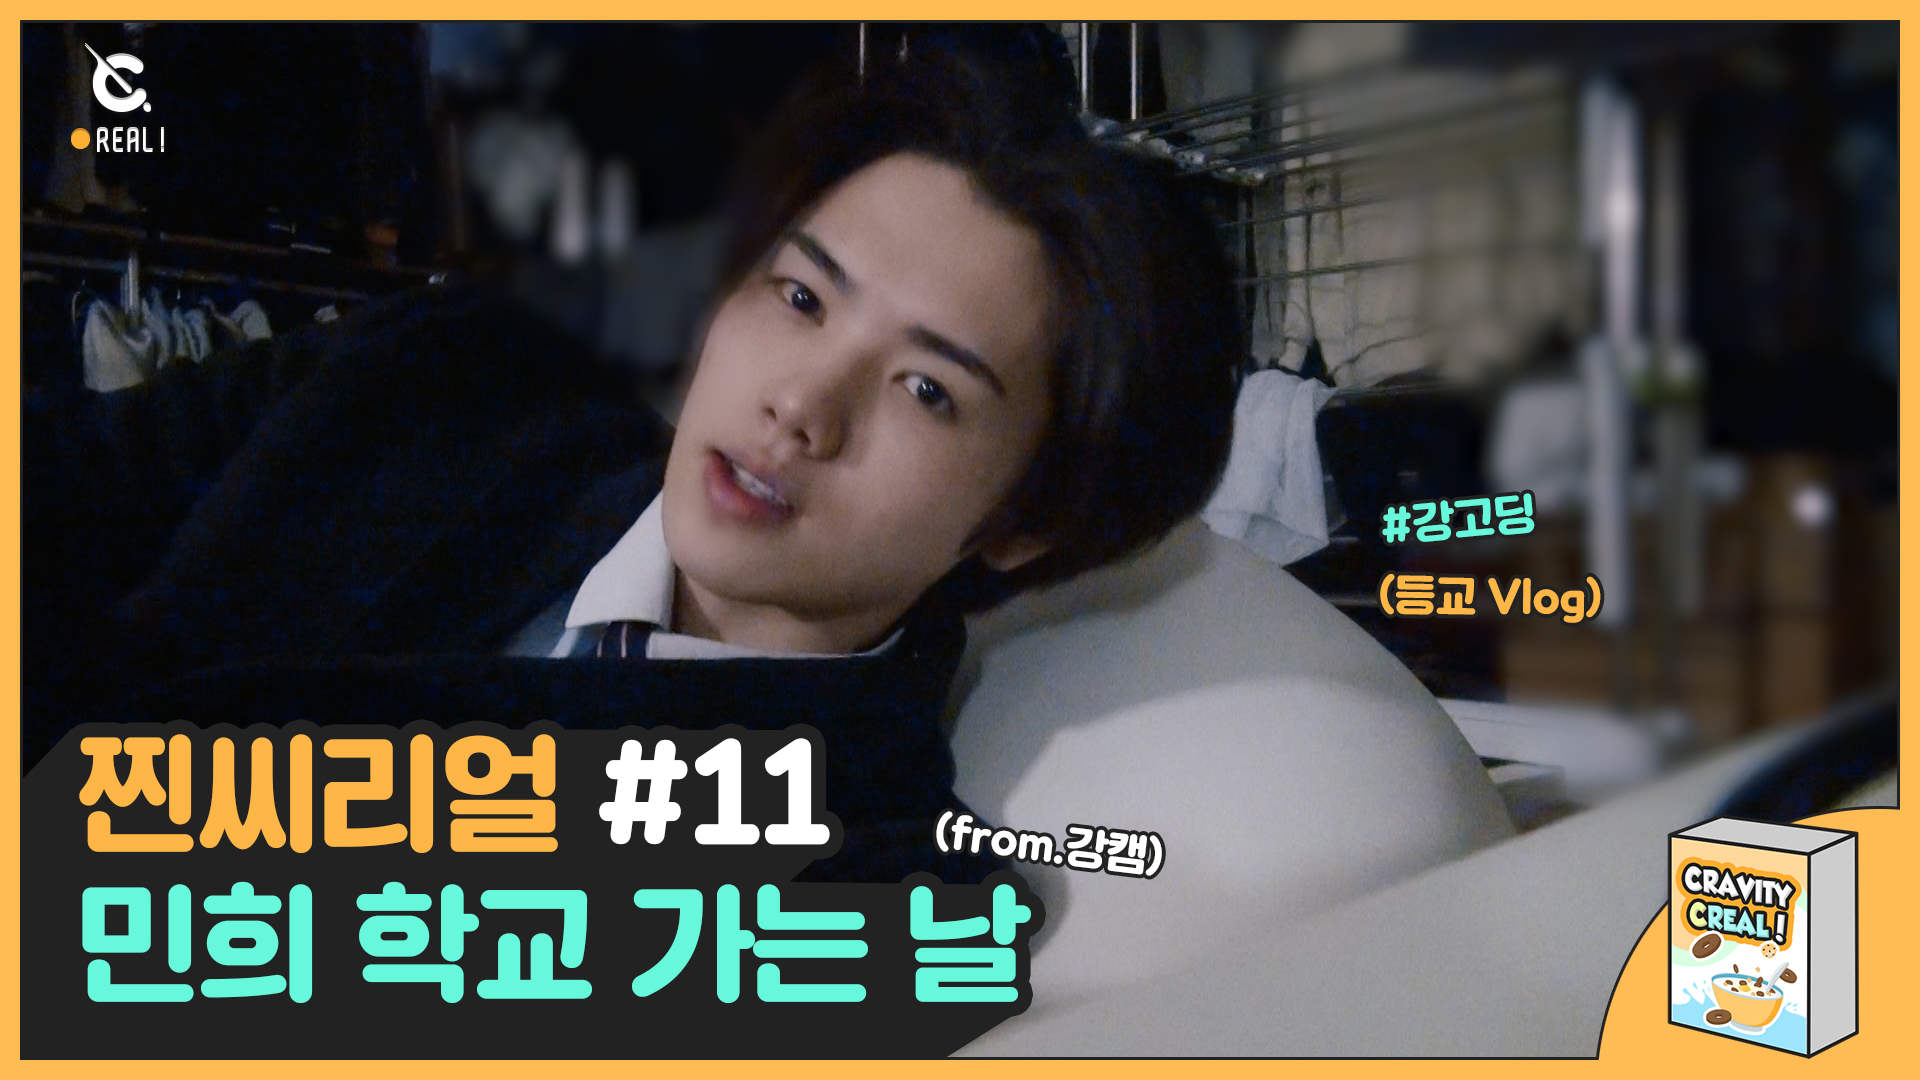 [C-Real] 찐씨리얼 #11. 민희 학교 가는 날 (REAL, SO REAL! C-REAL #11 - Minhee's typical school day!) l CRAVITY